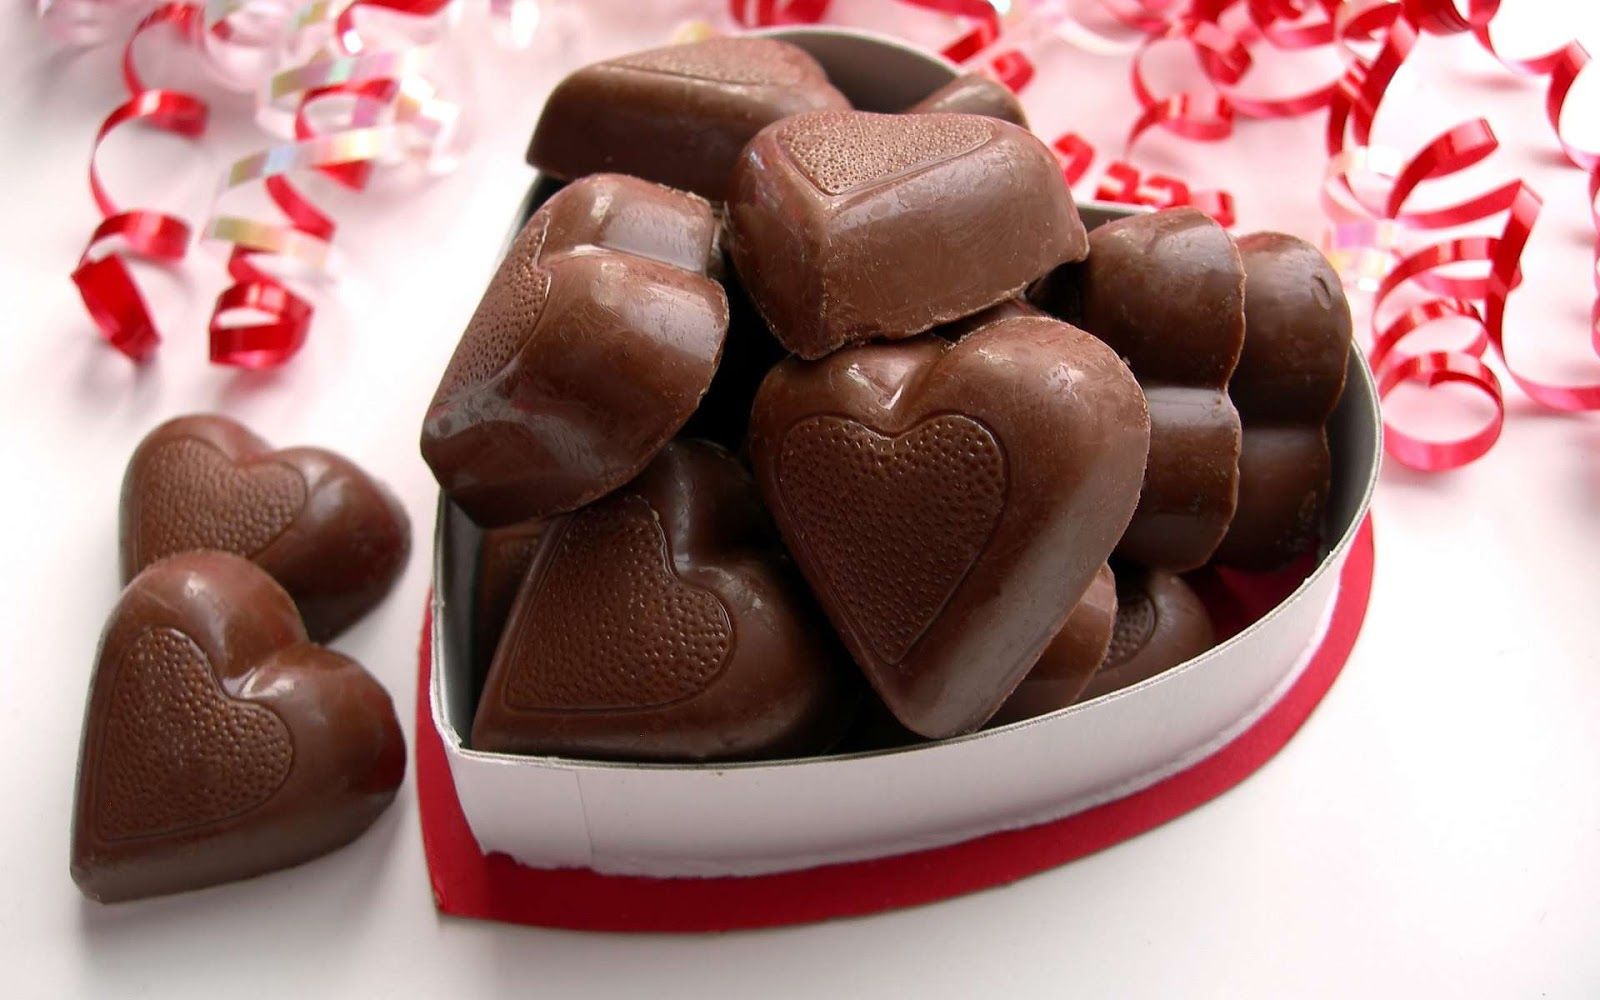 Happy Chocolate Day Wishes Love Quoteslatestlovesayings.blogspot.com